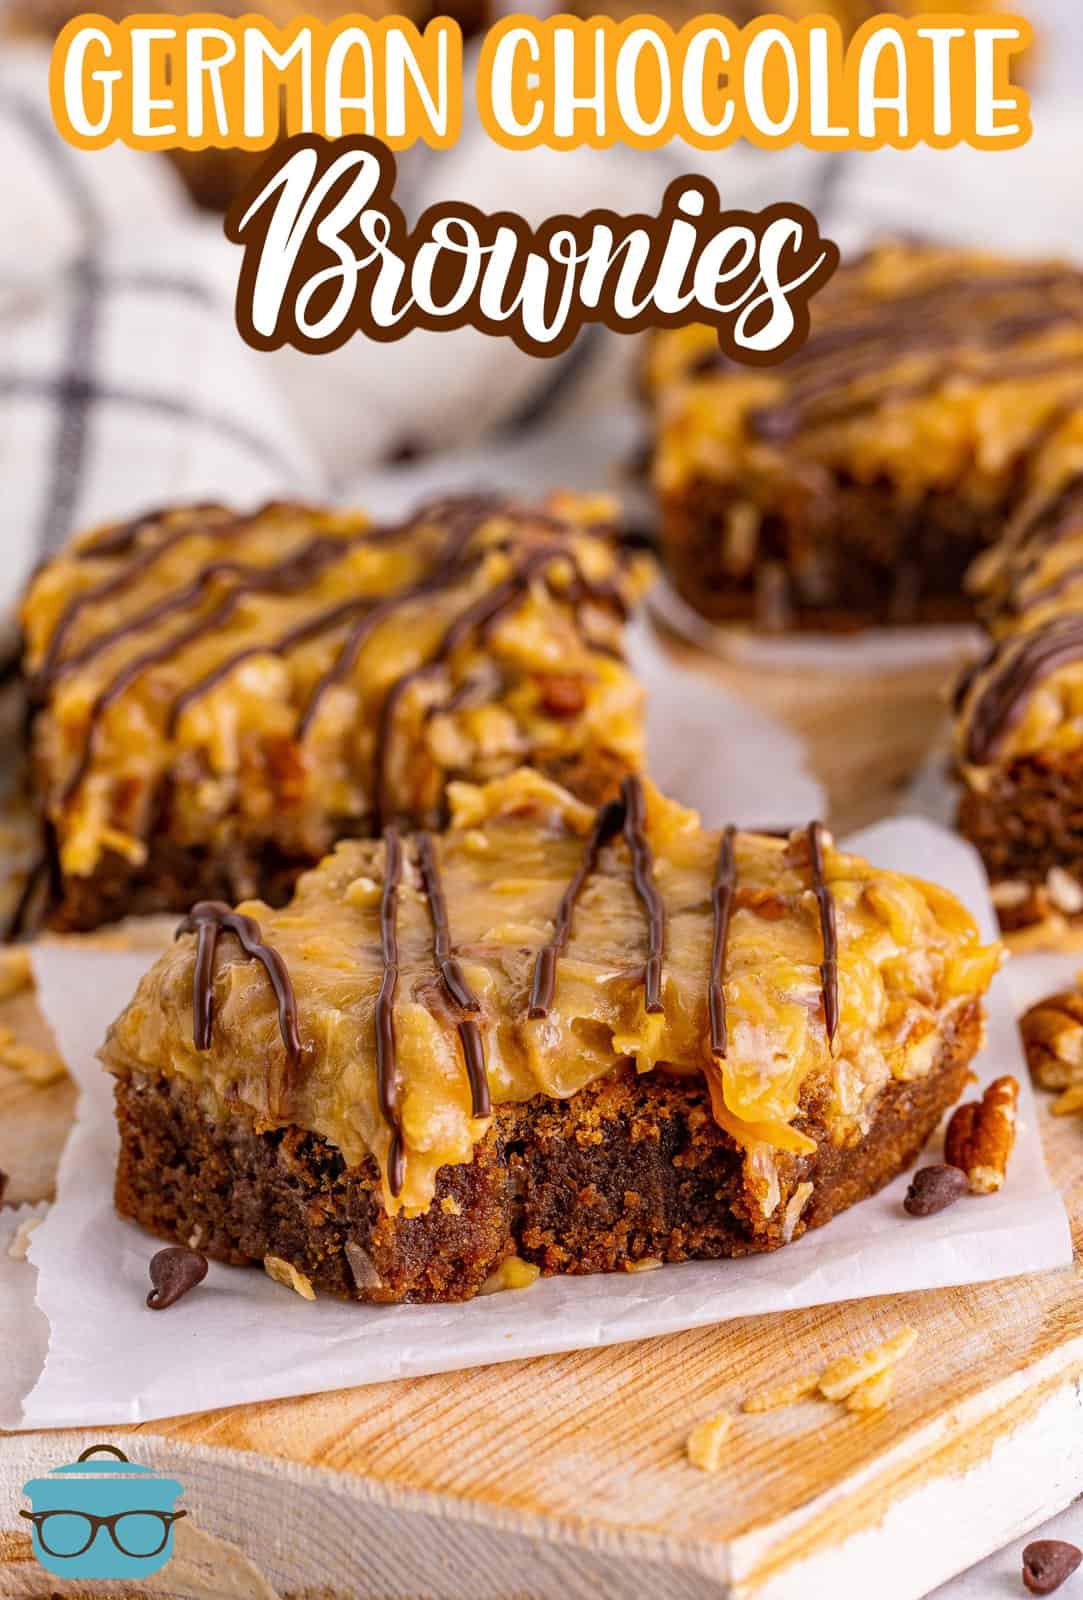 Pinterest image of German Chocolate Brownies on parchment squares with bite taken out of one.